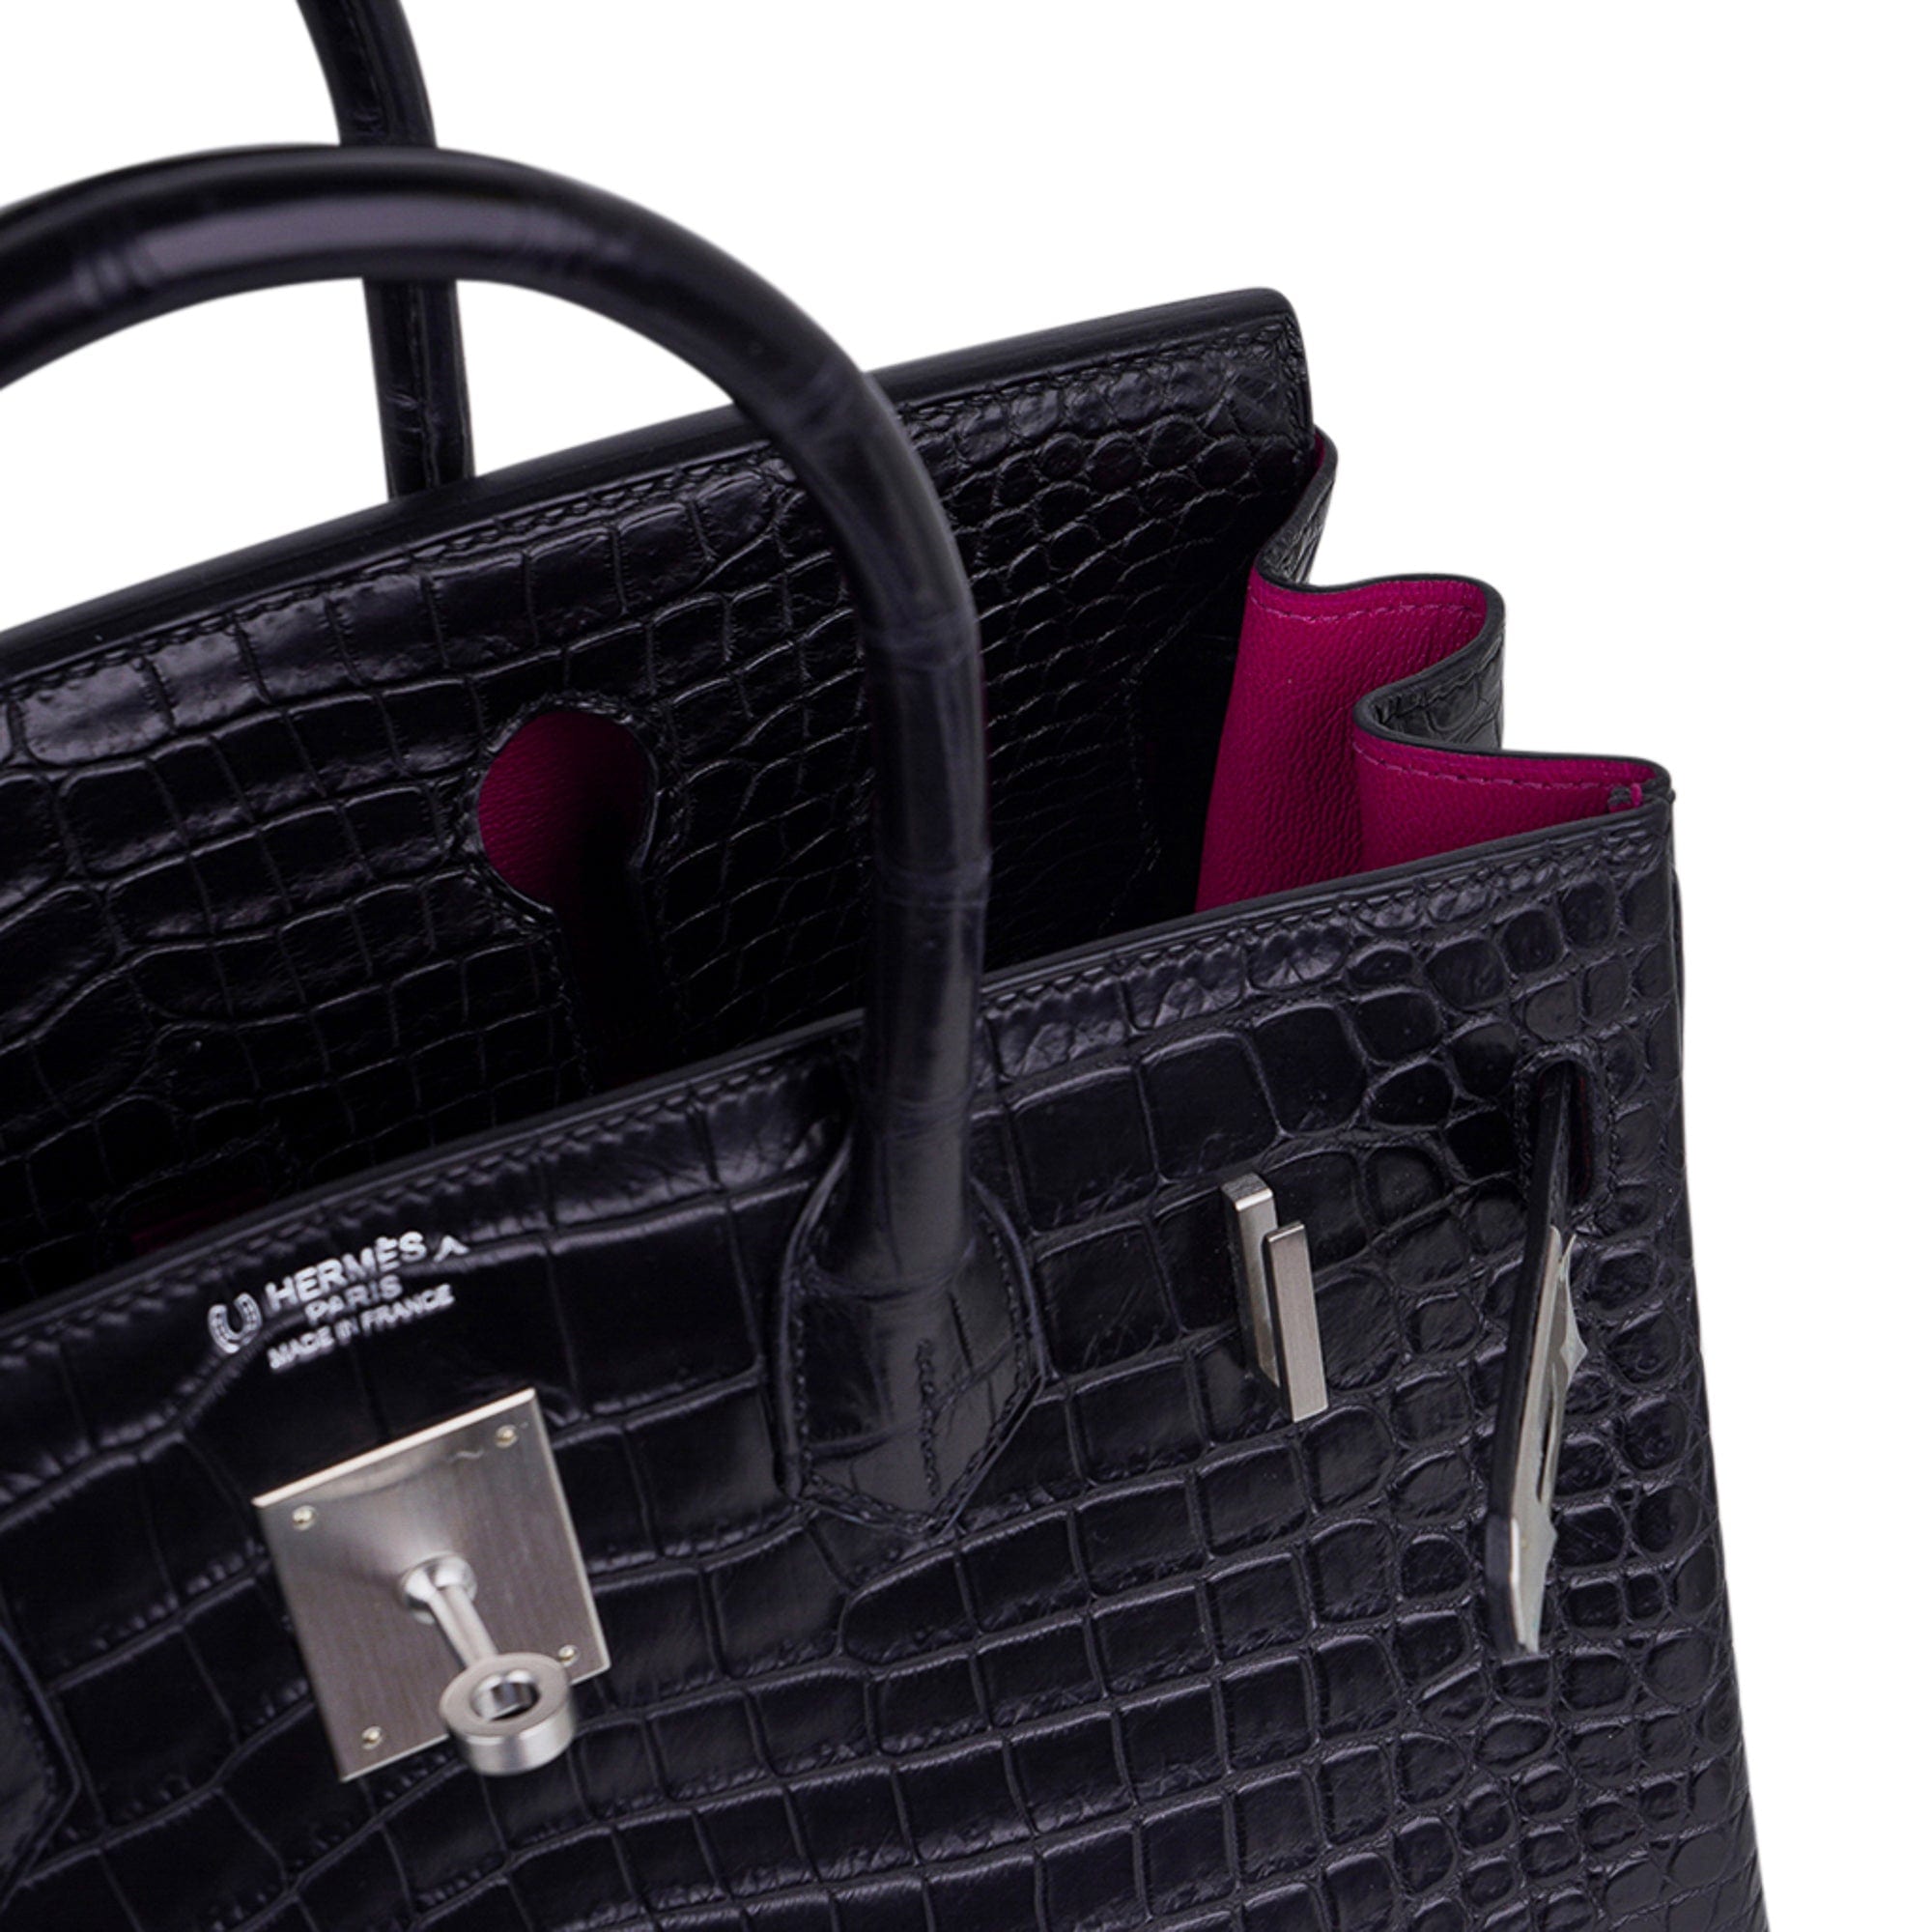 Pre-owned Hermes Special Order (HSS) Birkin 35 Black and White